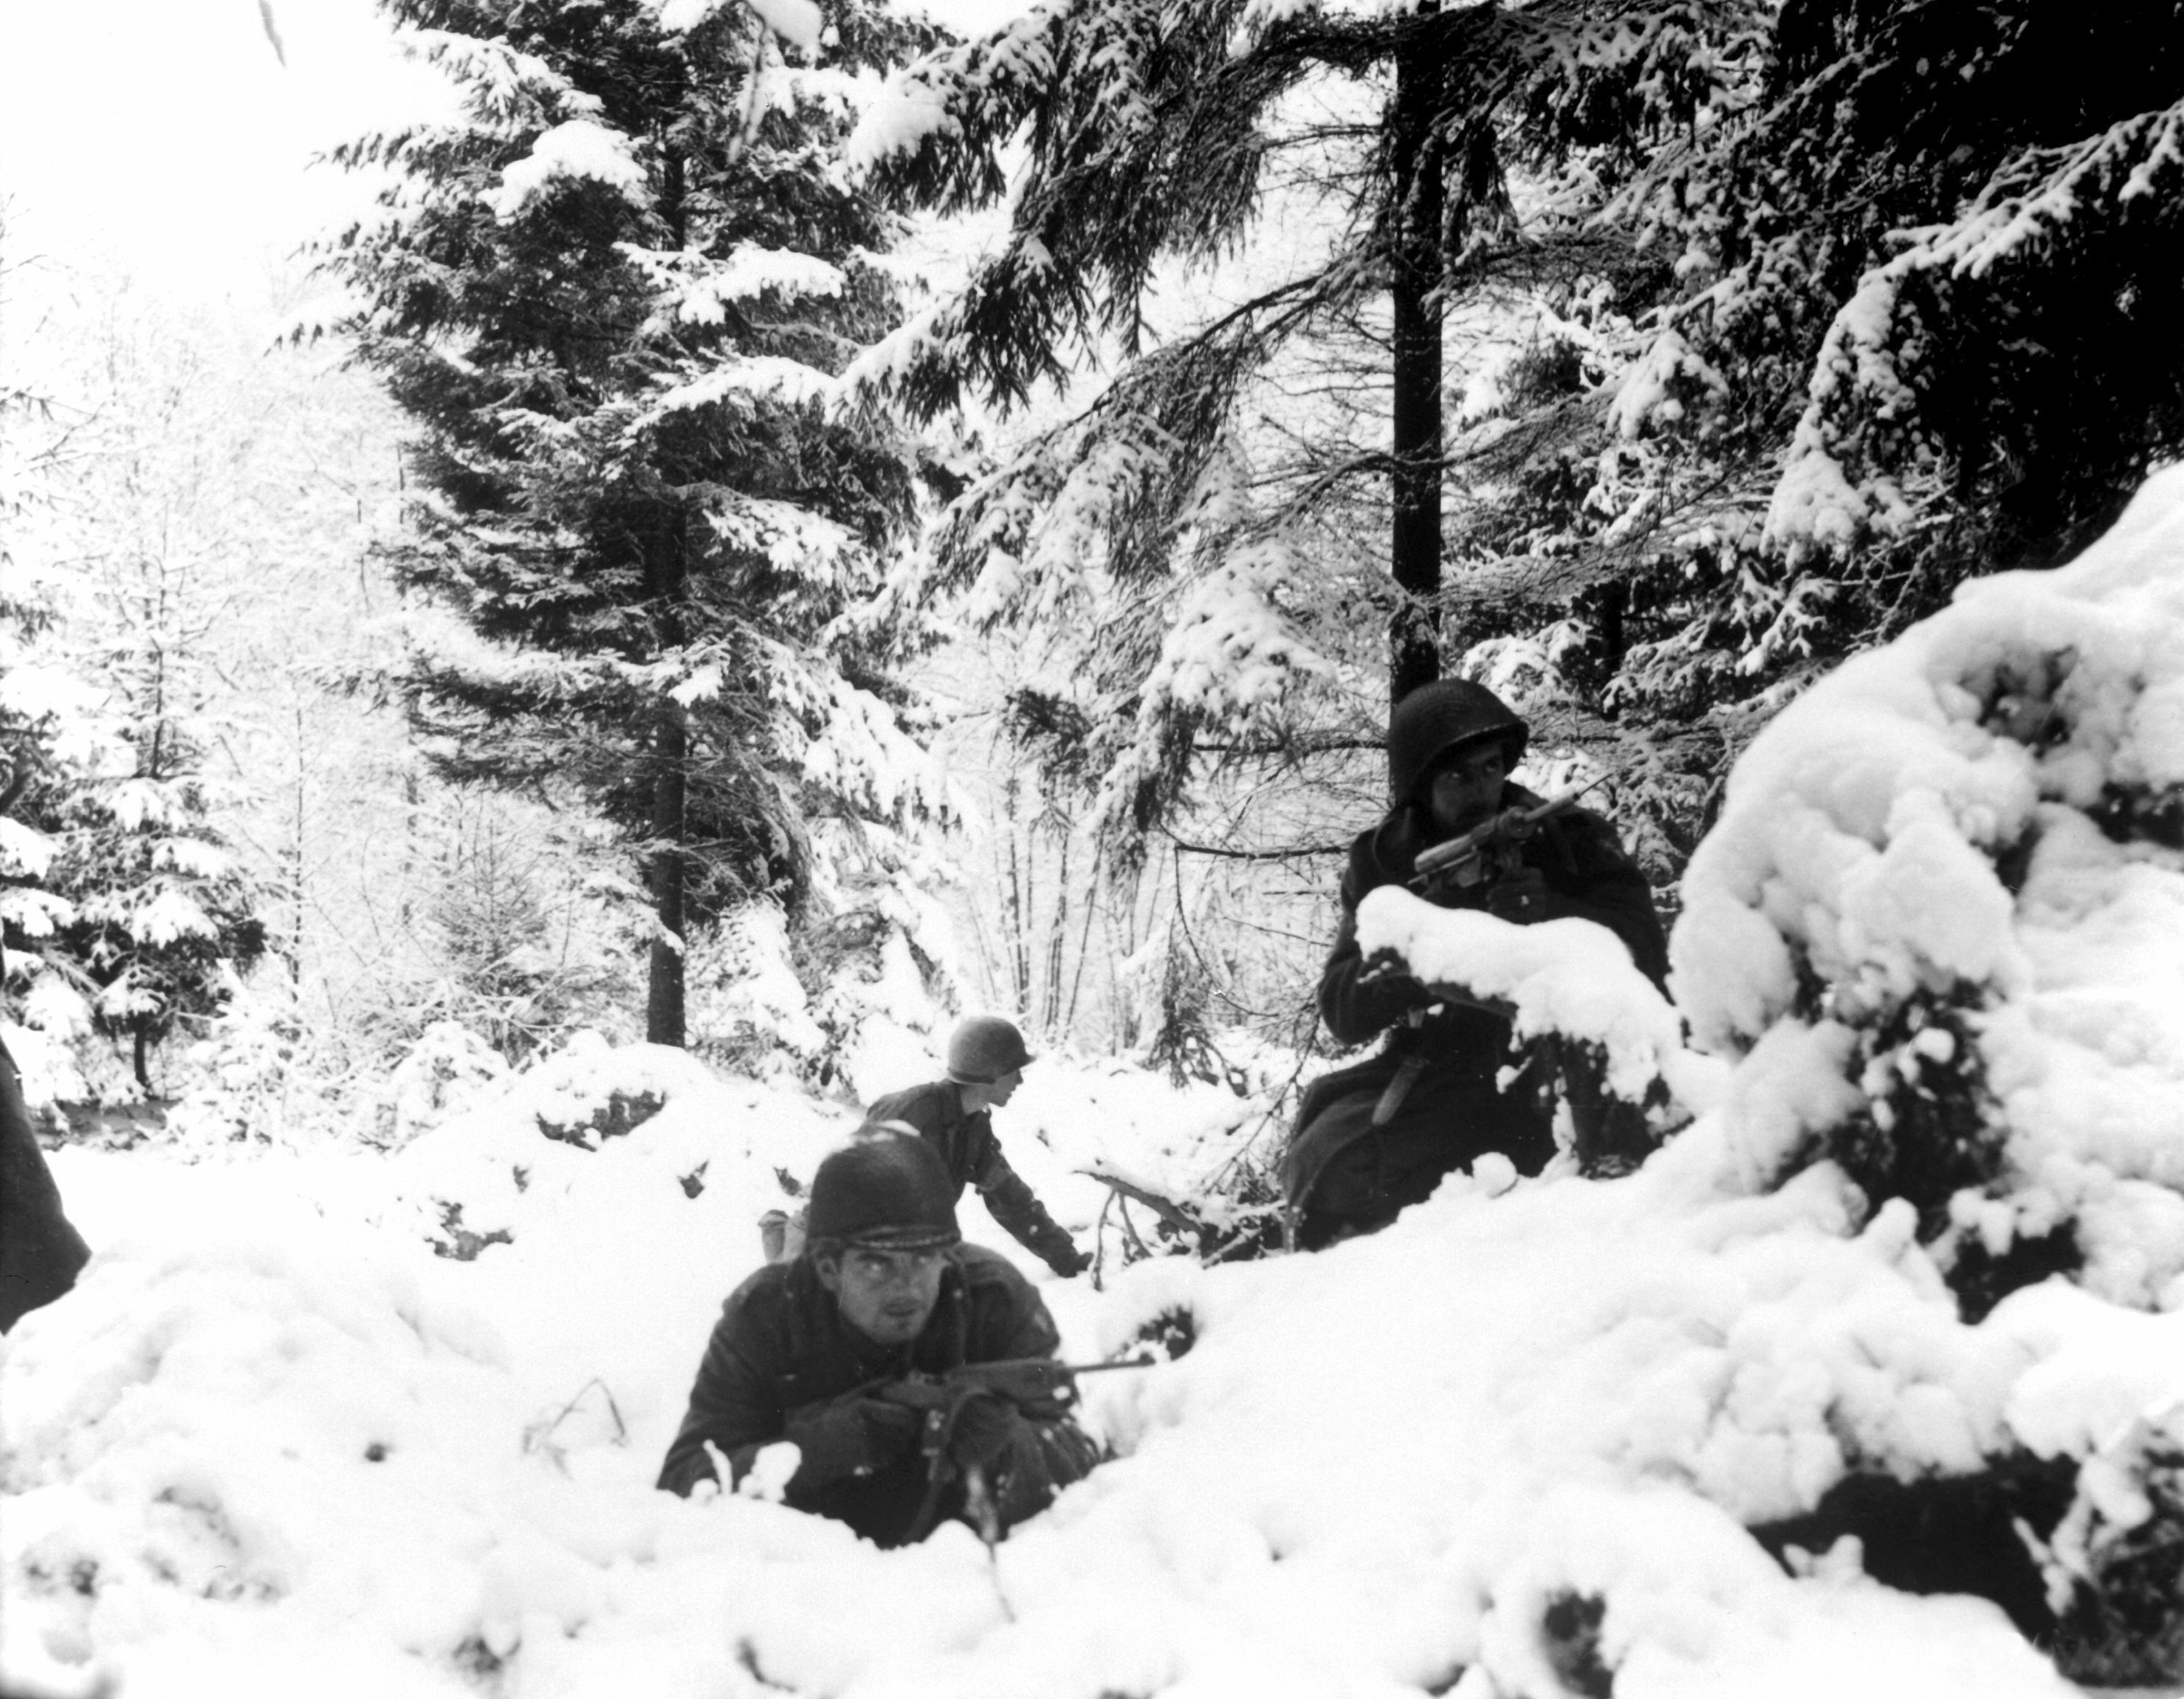 How many soldiers died in the battle of the bulge Battle Of The Bulge Simple English Wikipedia The Free Encyclopedia